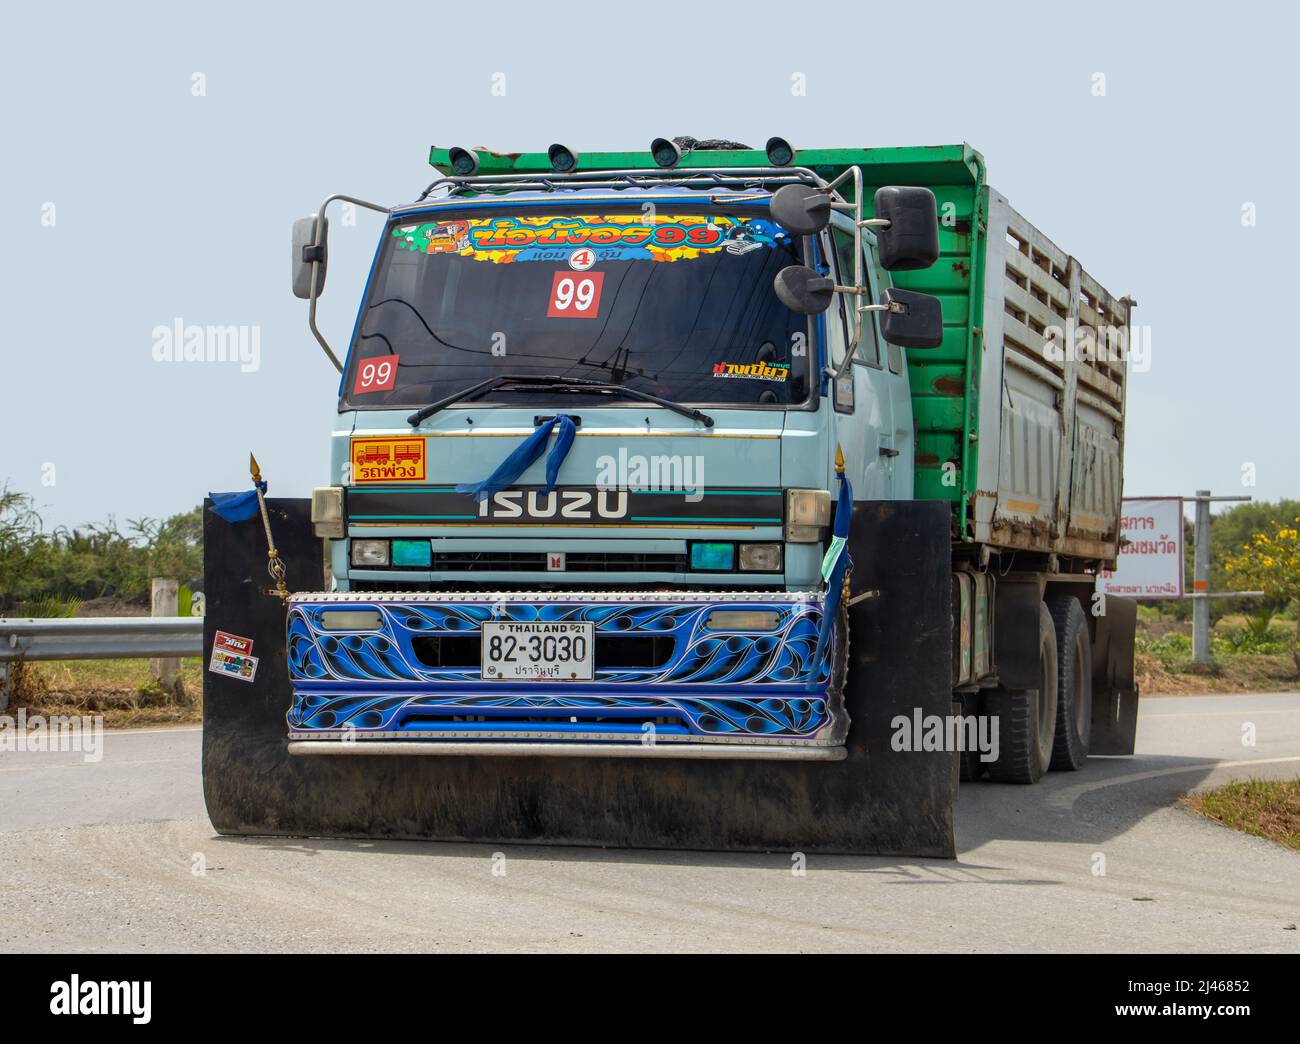 SAMUT PRAKAN, THAILAND, MARCH 23 2022, A truck with wide mud flaps drives on the rural road Stock Photo